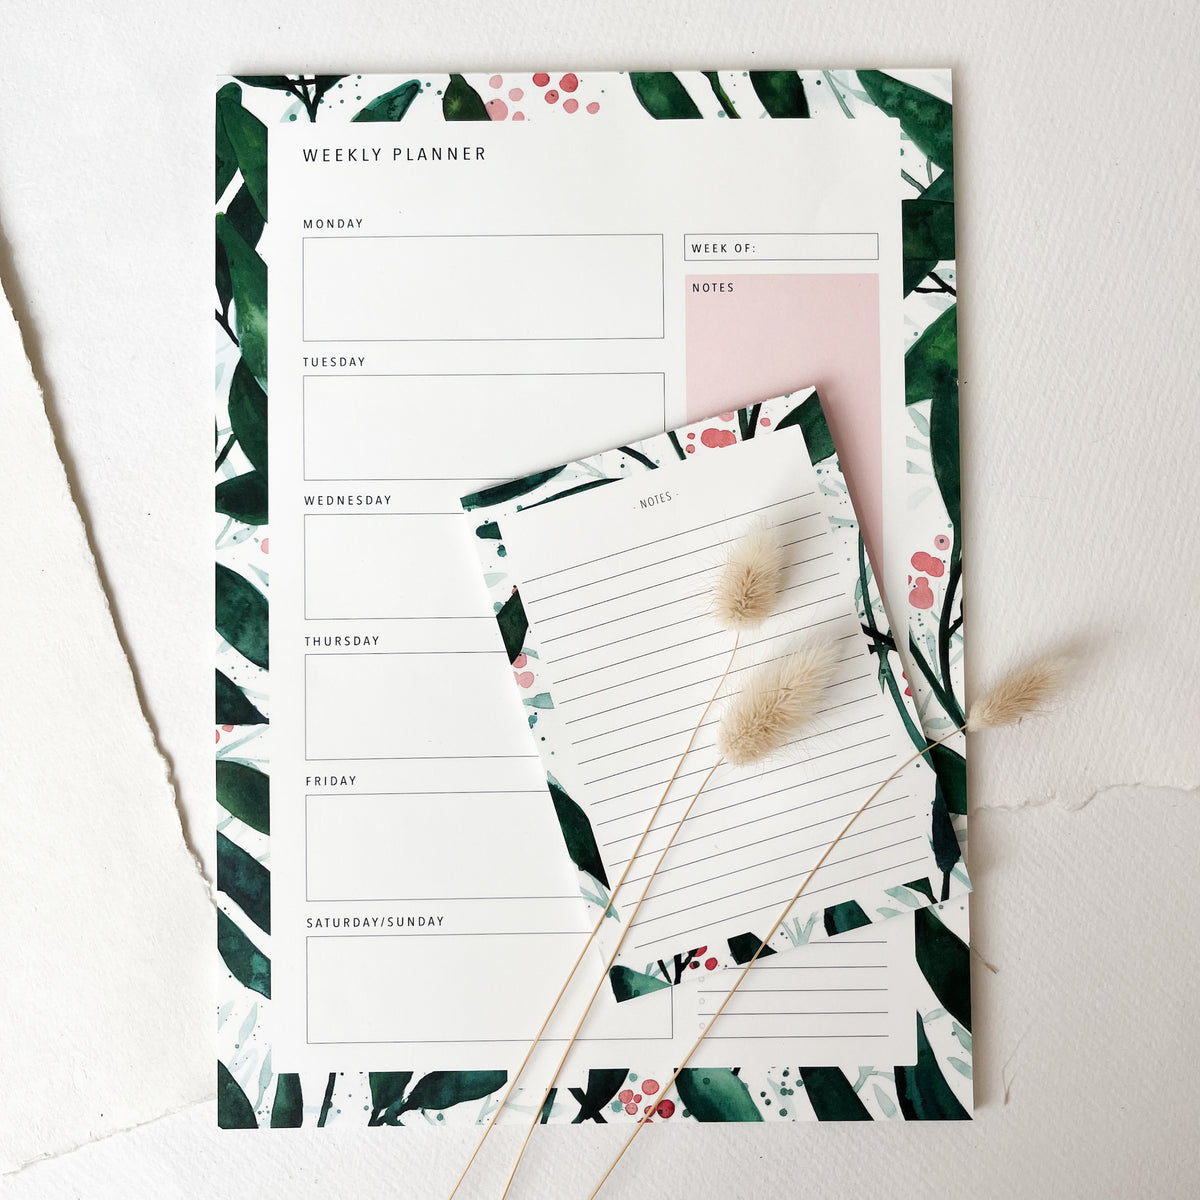 Weekly Planner - Green Leaves No1 | A4